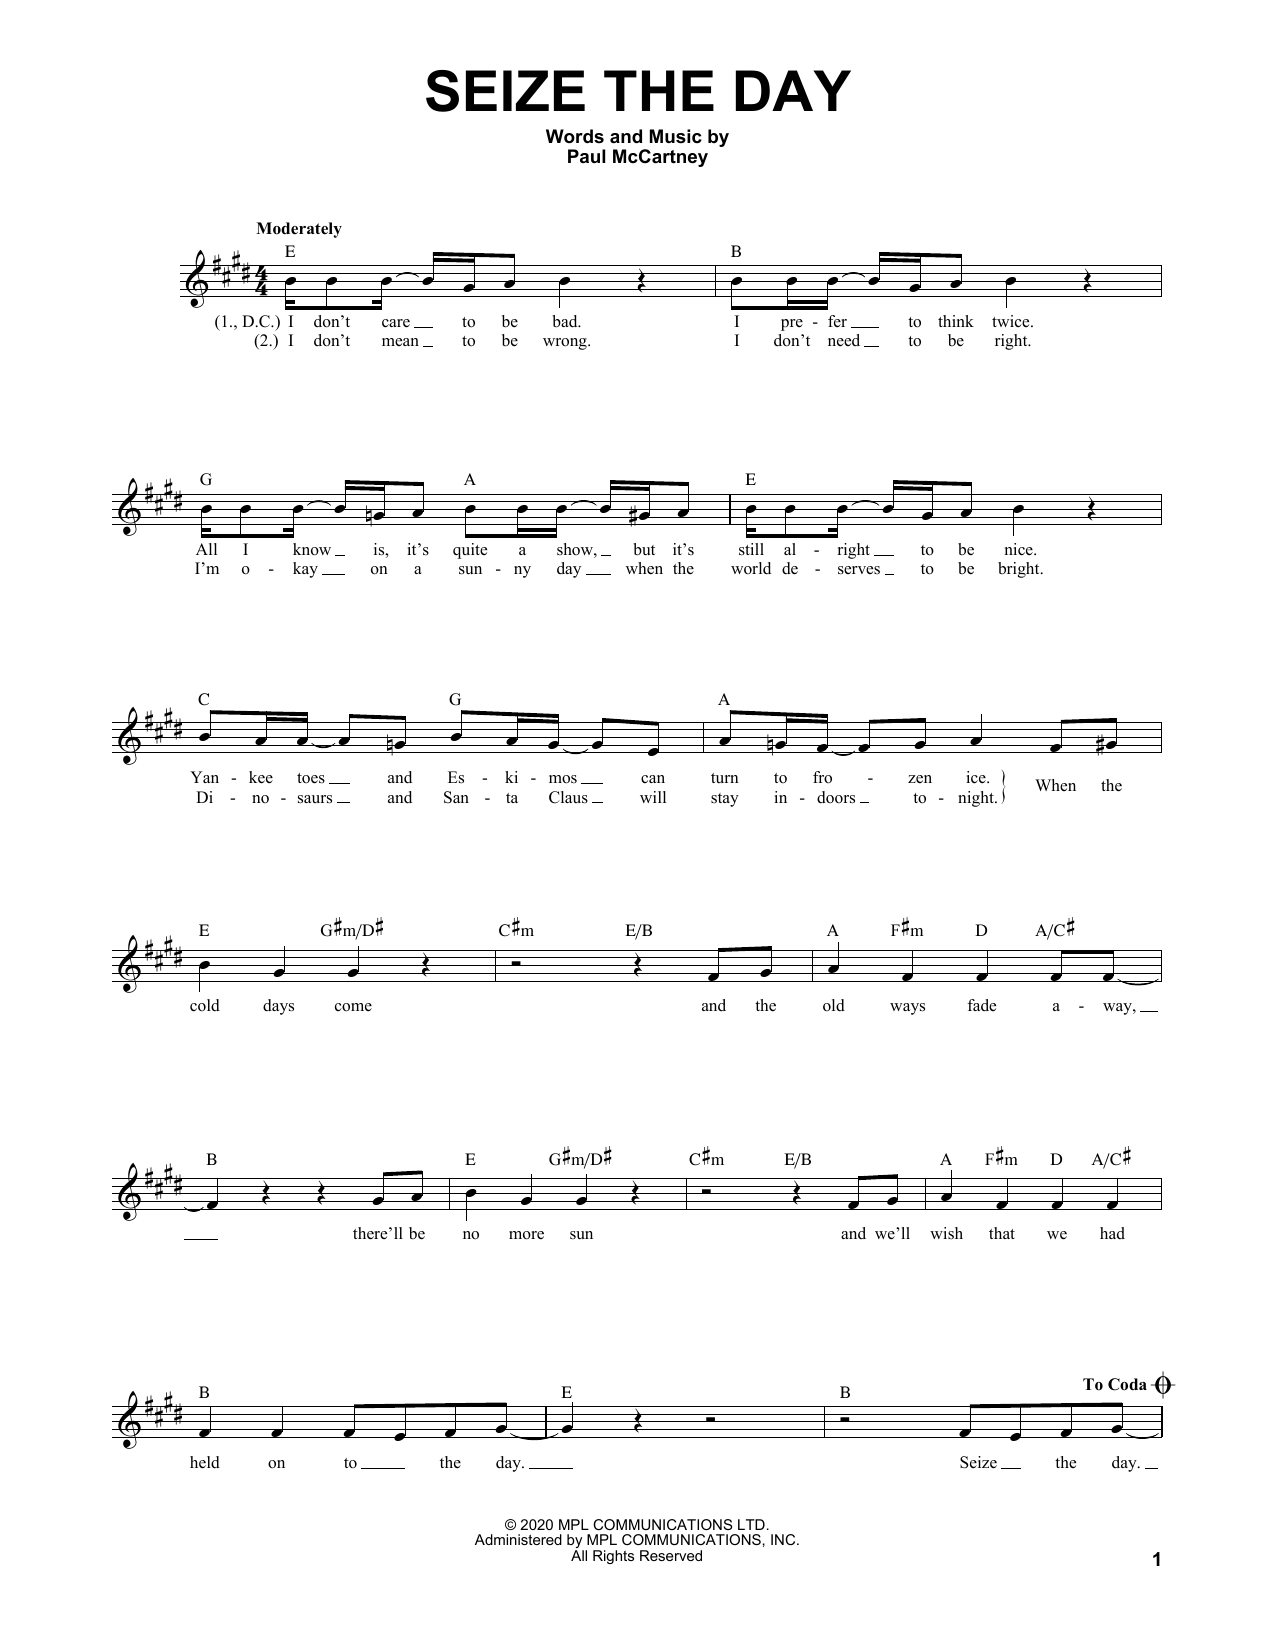 Download Paul McCartney Seize The Day Sheet Music